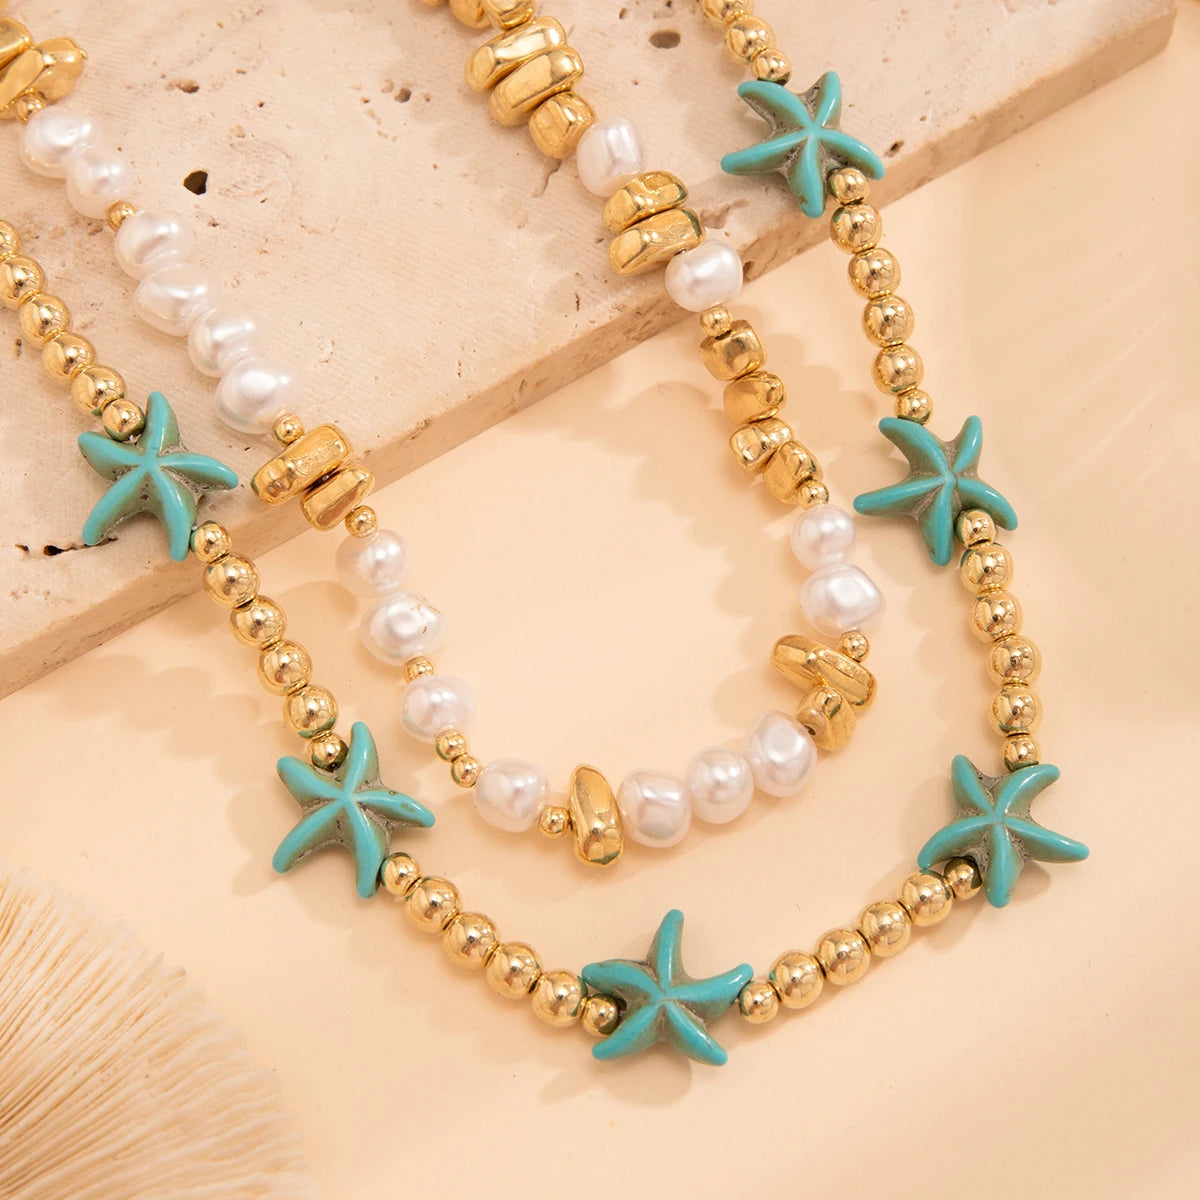 2Pcs/Set Boho Ocean Blue Starfish Star Beads Chain Necklace for Women - Madeinsea©